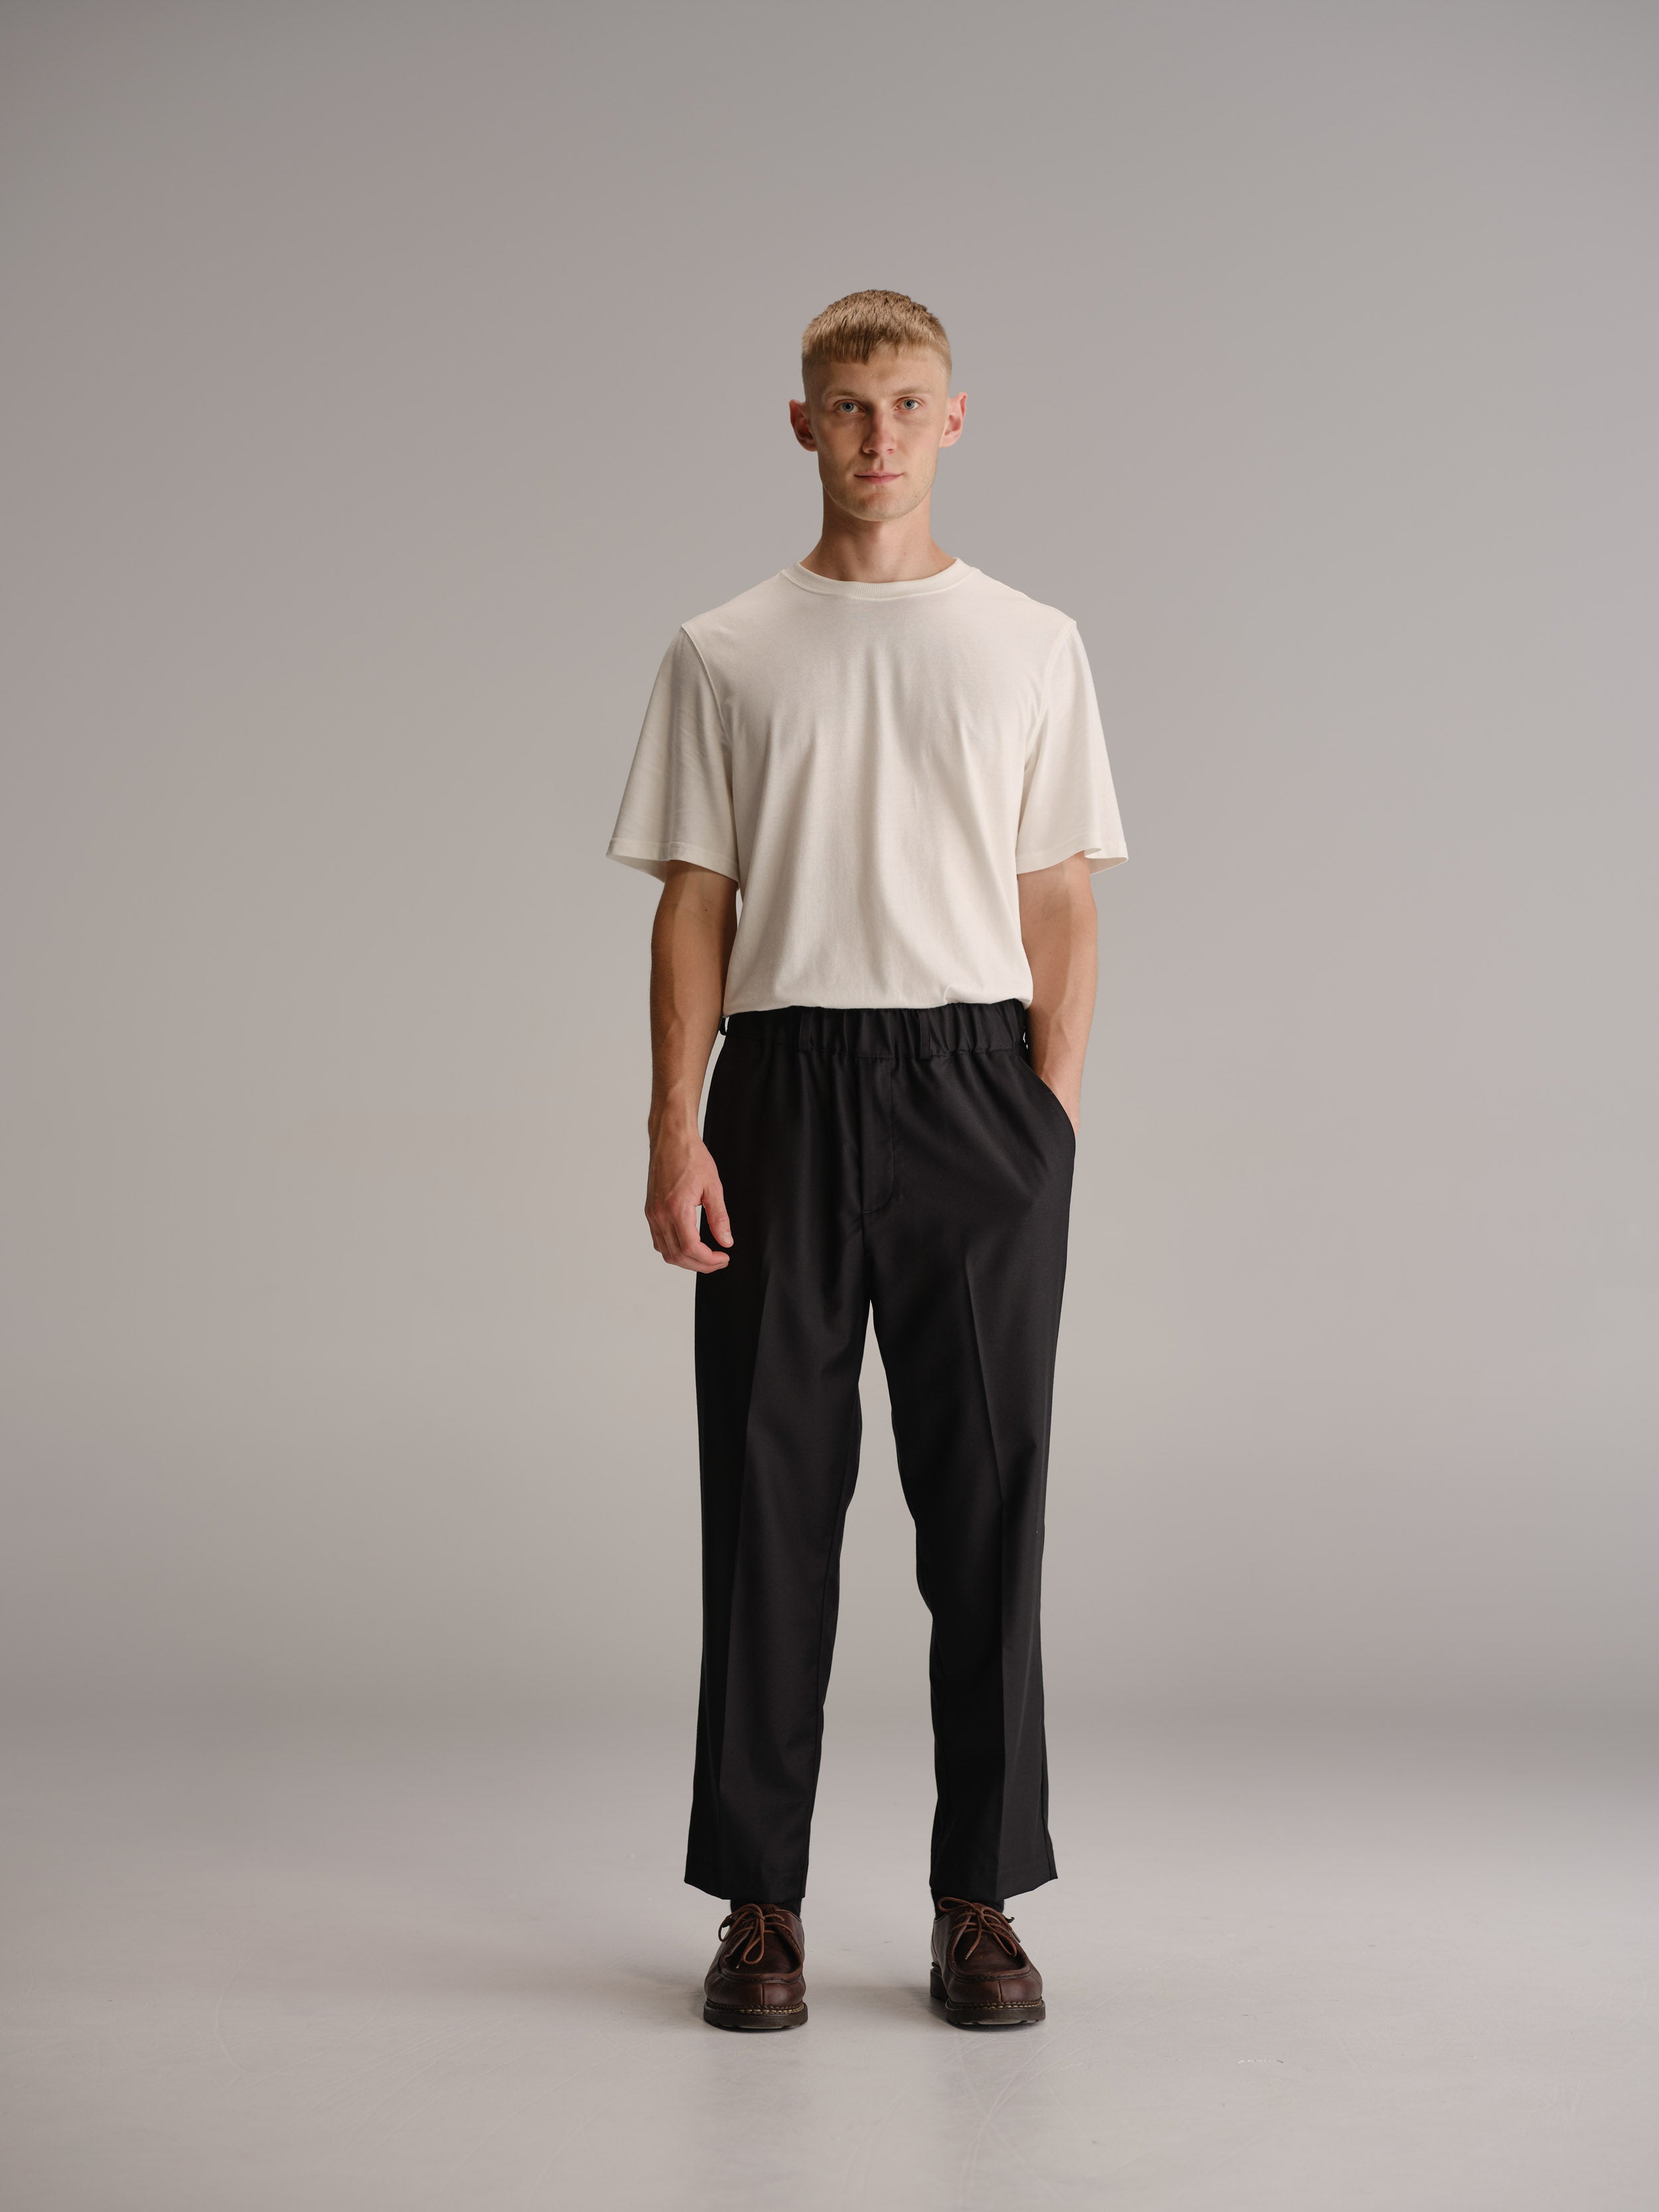 Front view of man standing in white studio wearing a tucked in white t-shirt and black trousers with brown leather shoes.